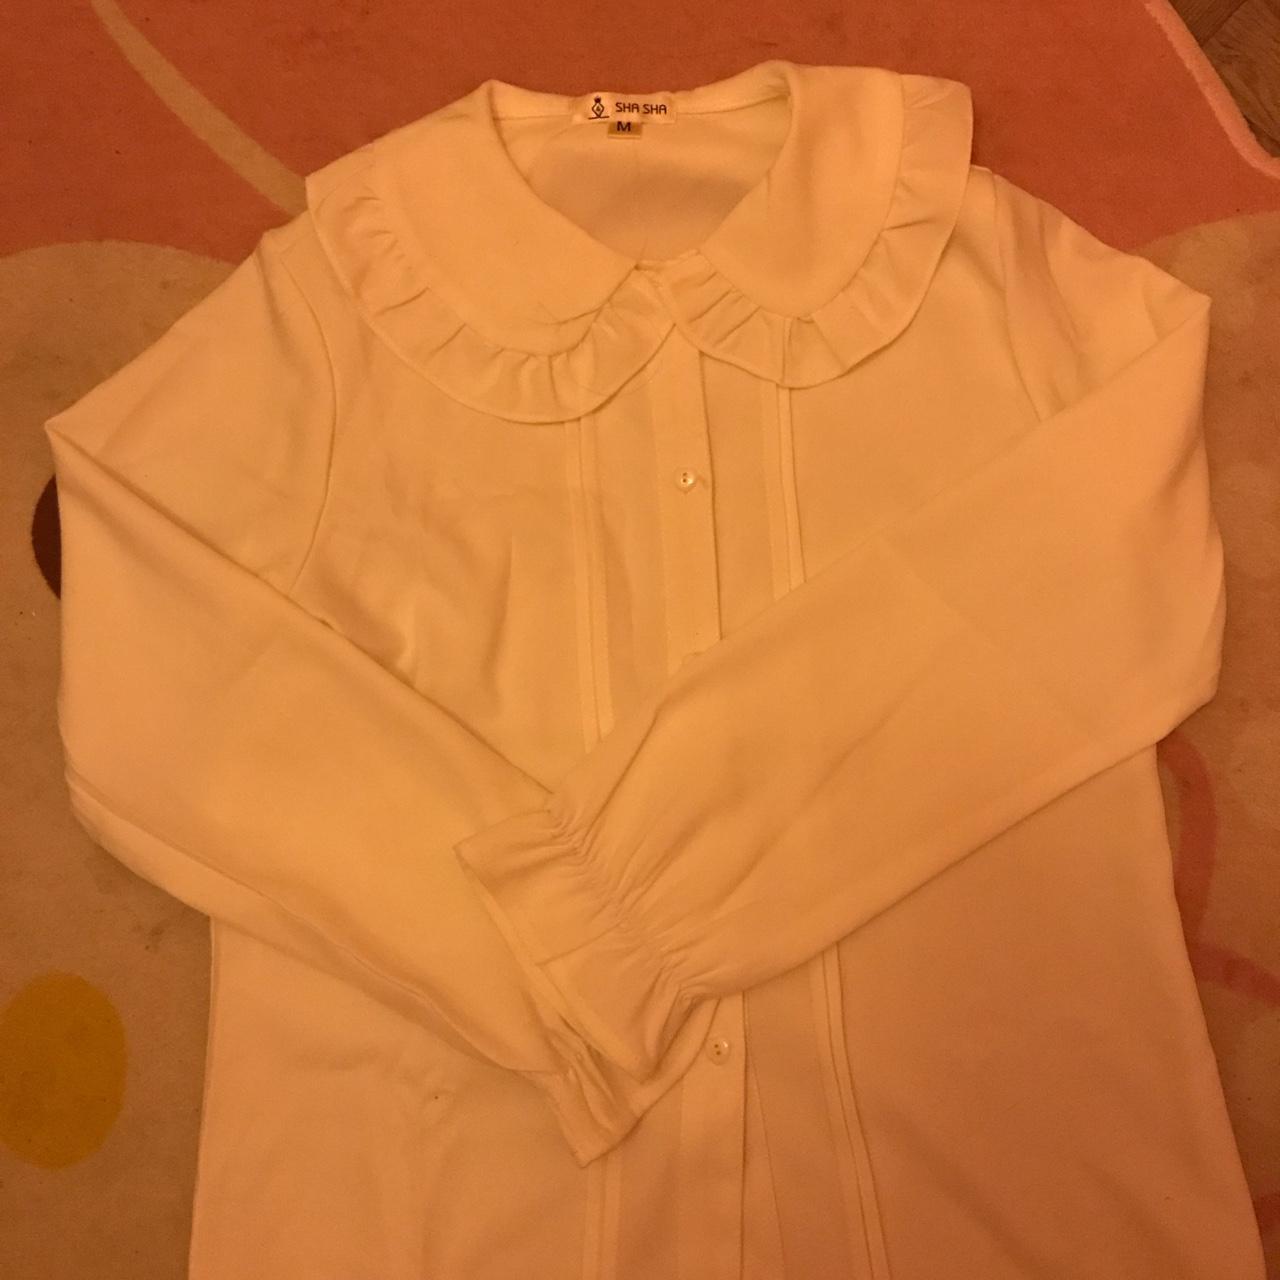 Kawaii lolita dress and blouse neither the dres or... - Depop